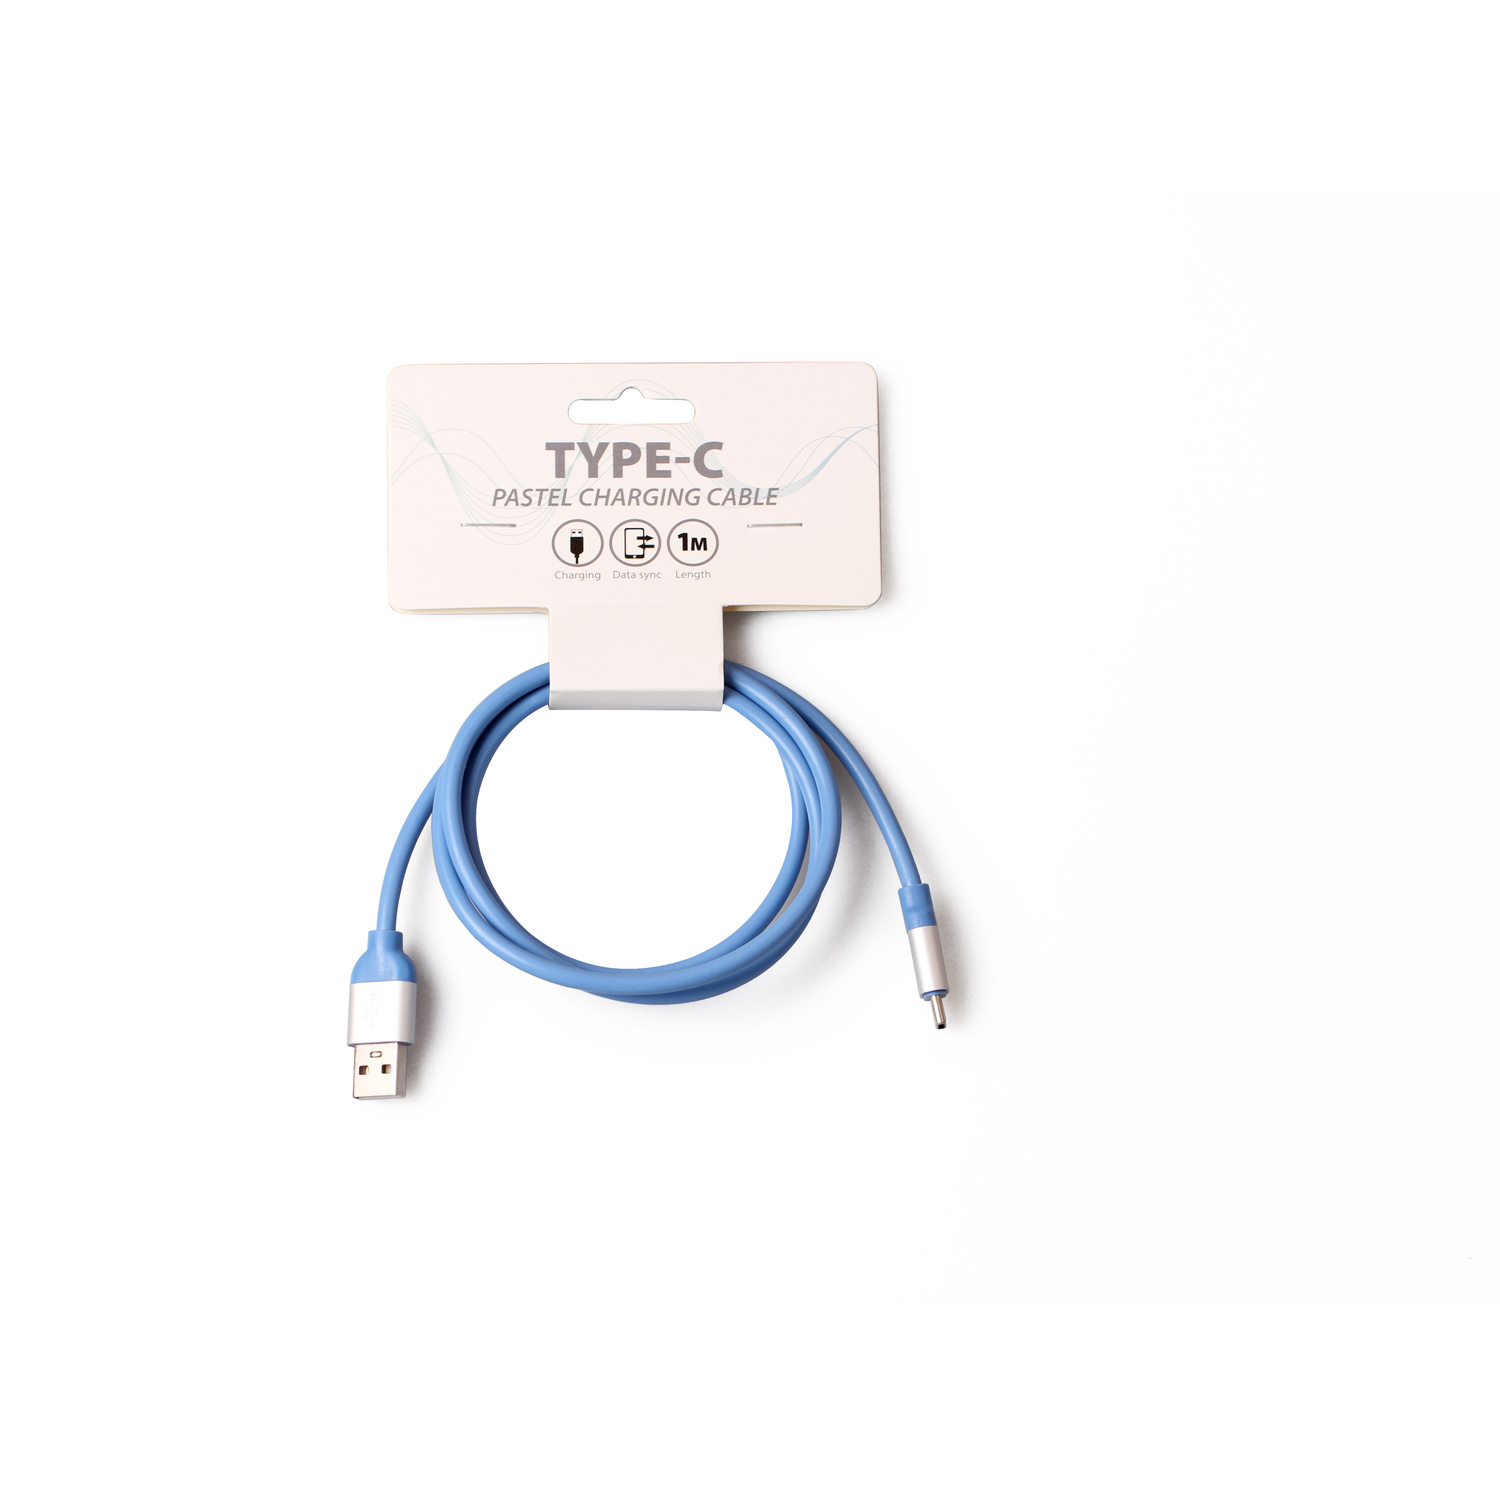 Type-C Pastel Charging Cable Image 4